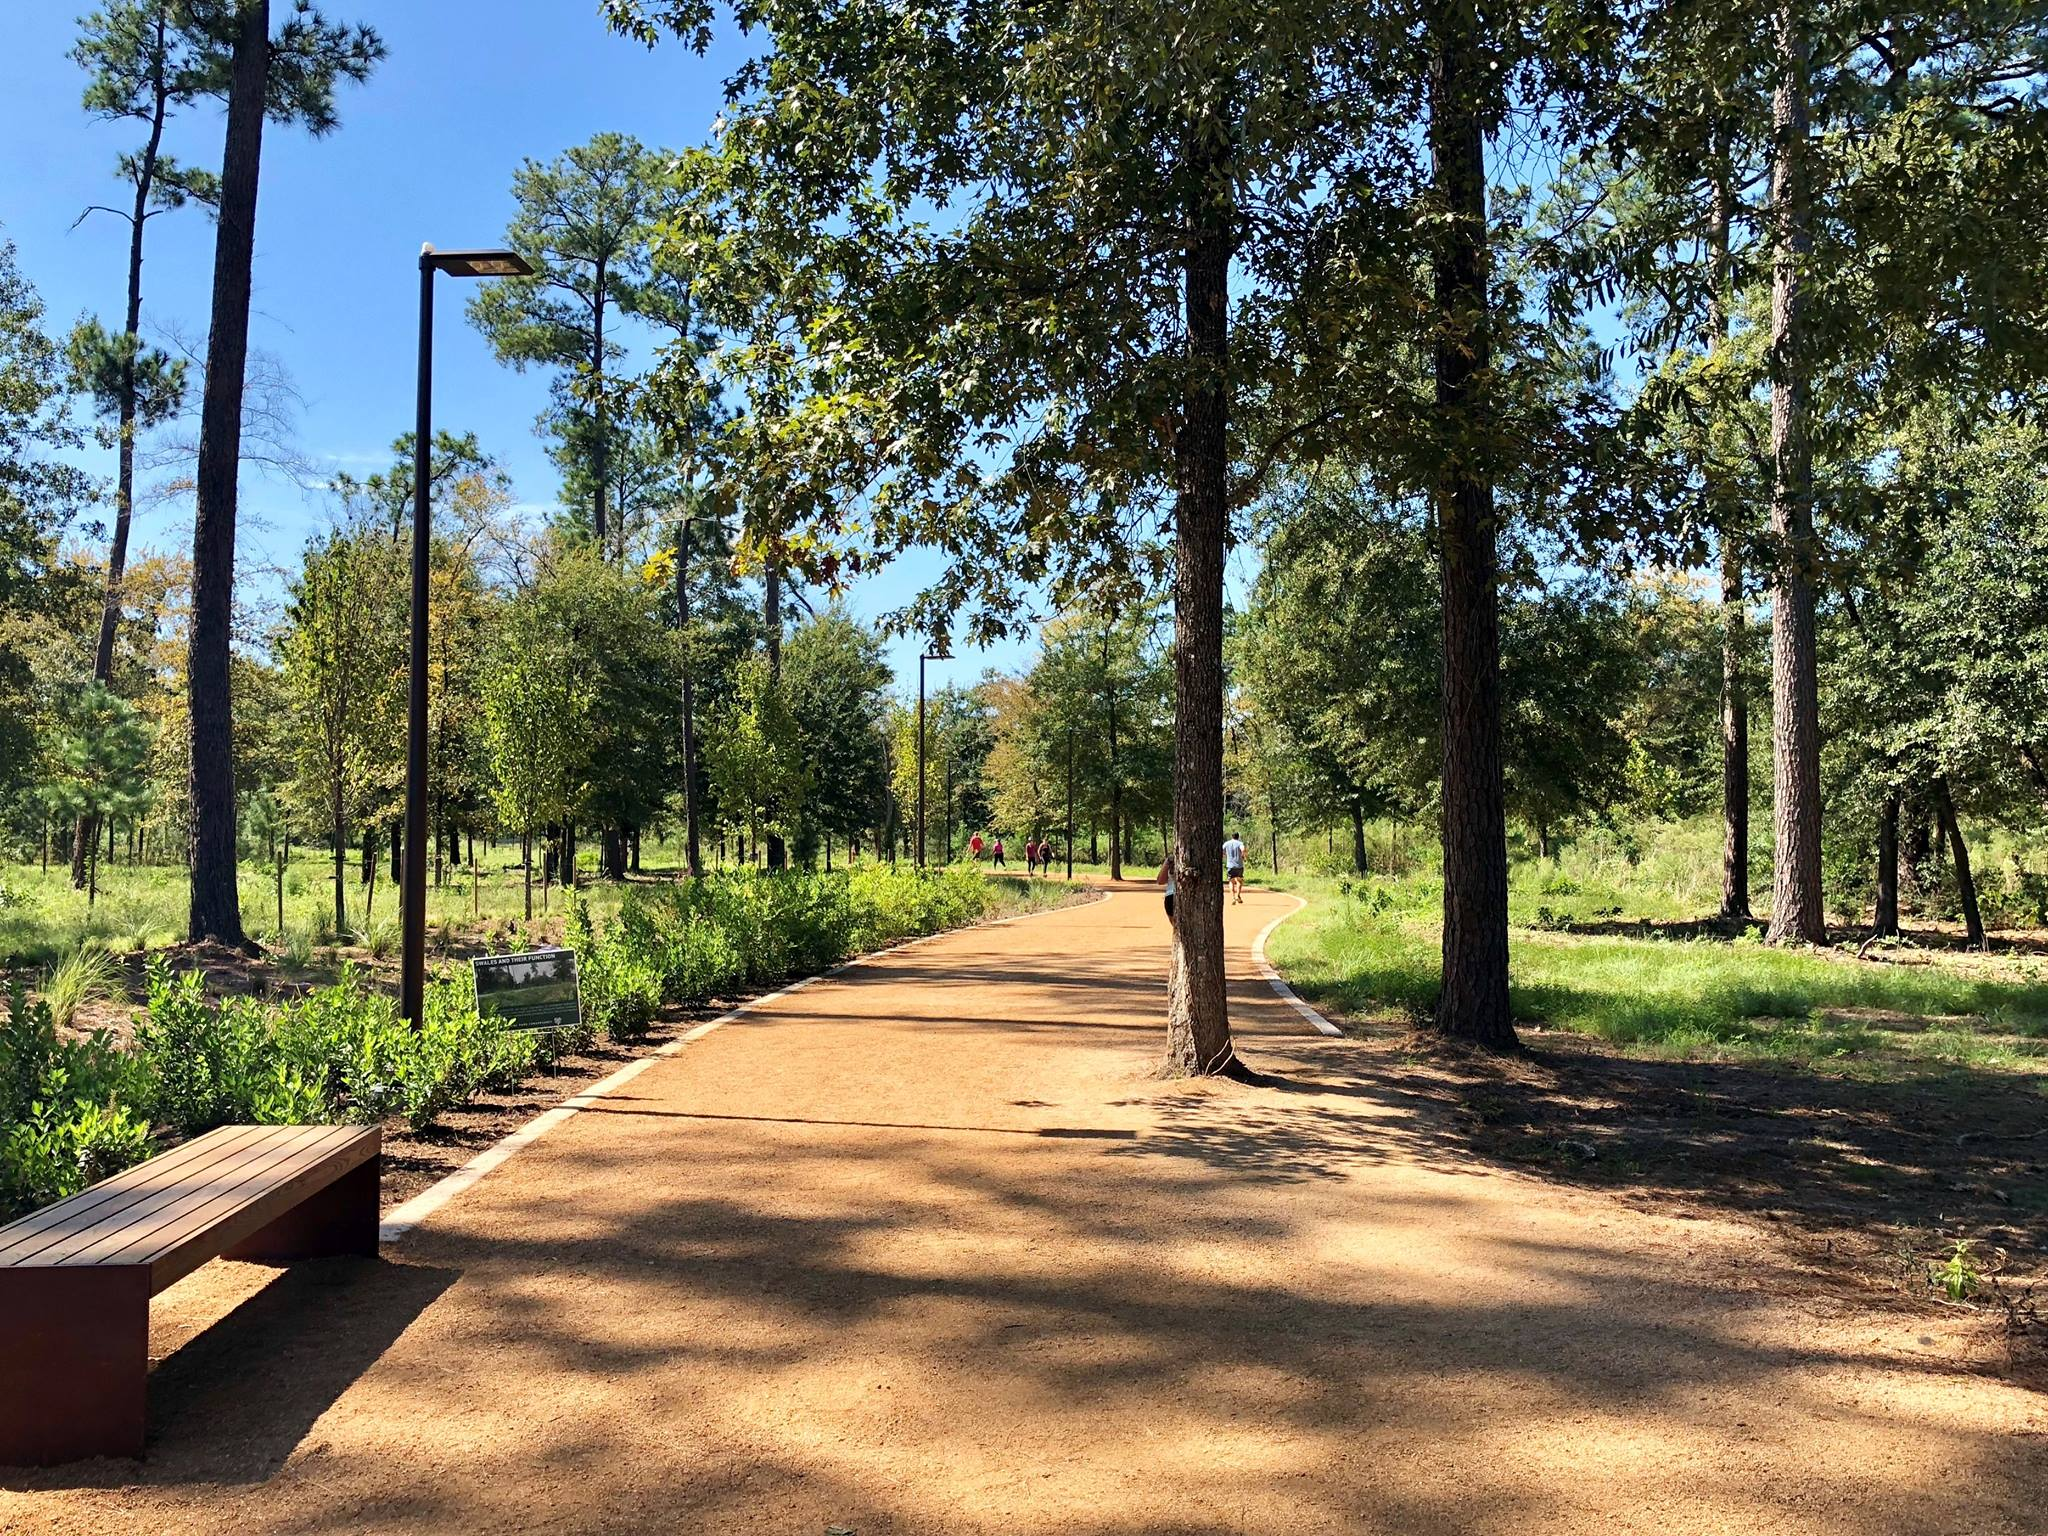 Houston’s Memorial Park, where we did some of our summer runs